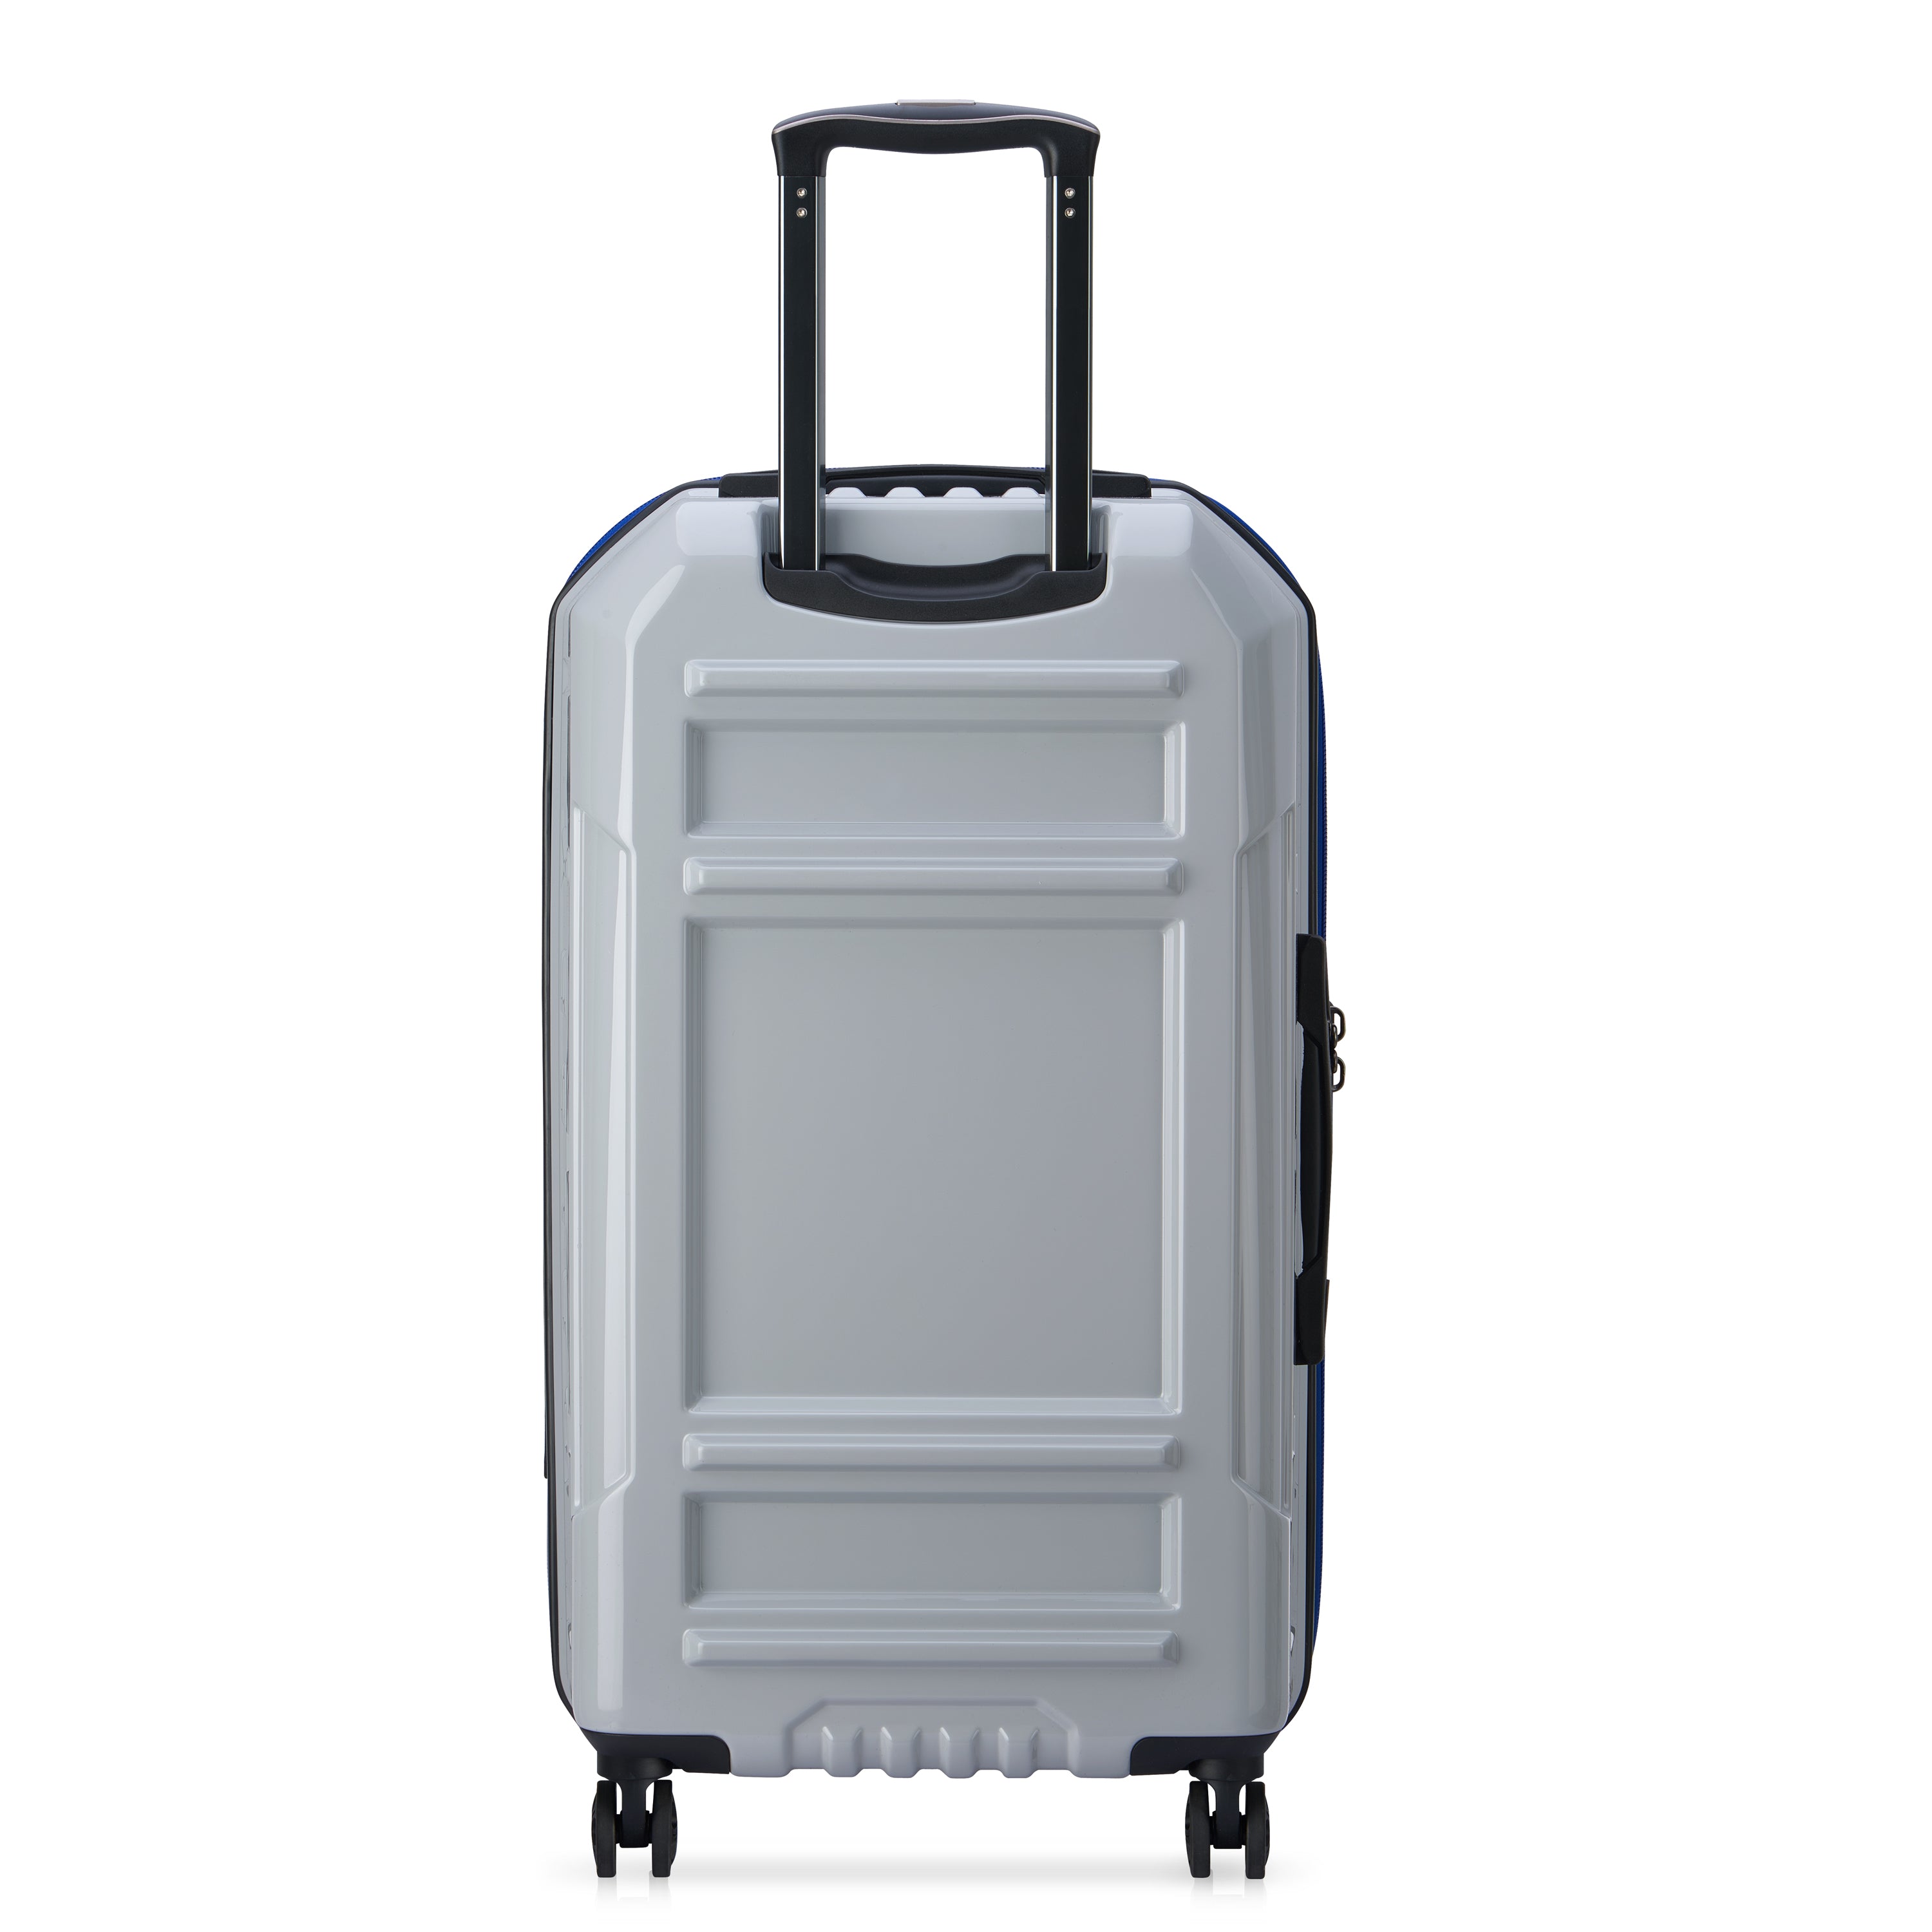 Delsey Rempart 73cm Hardcase Expandable 4 Double Wheel Flex Check-In  Luggage Trolley Case  Trunk Storm Grey  Glossy - 218181821